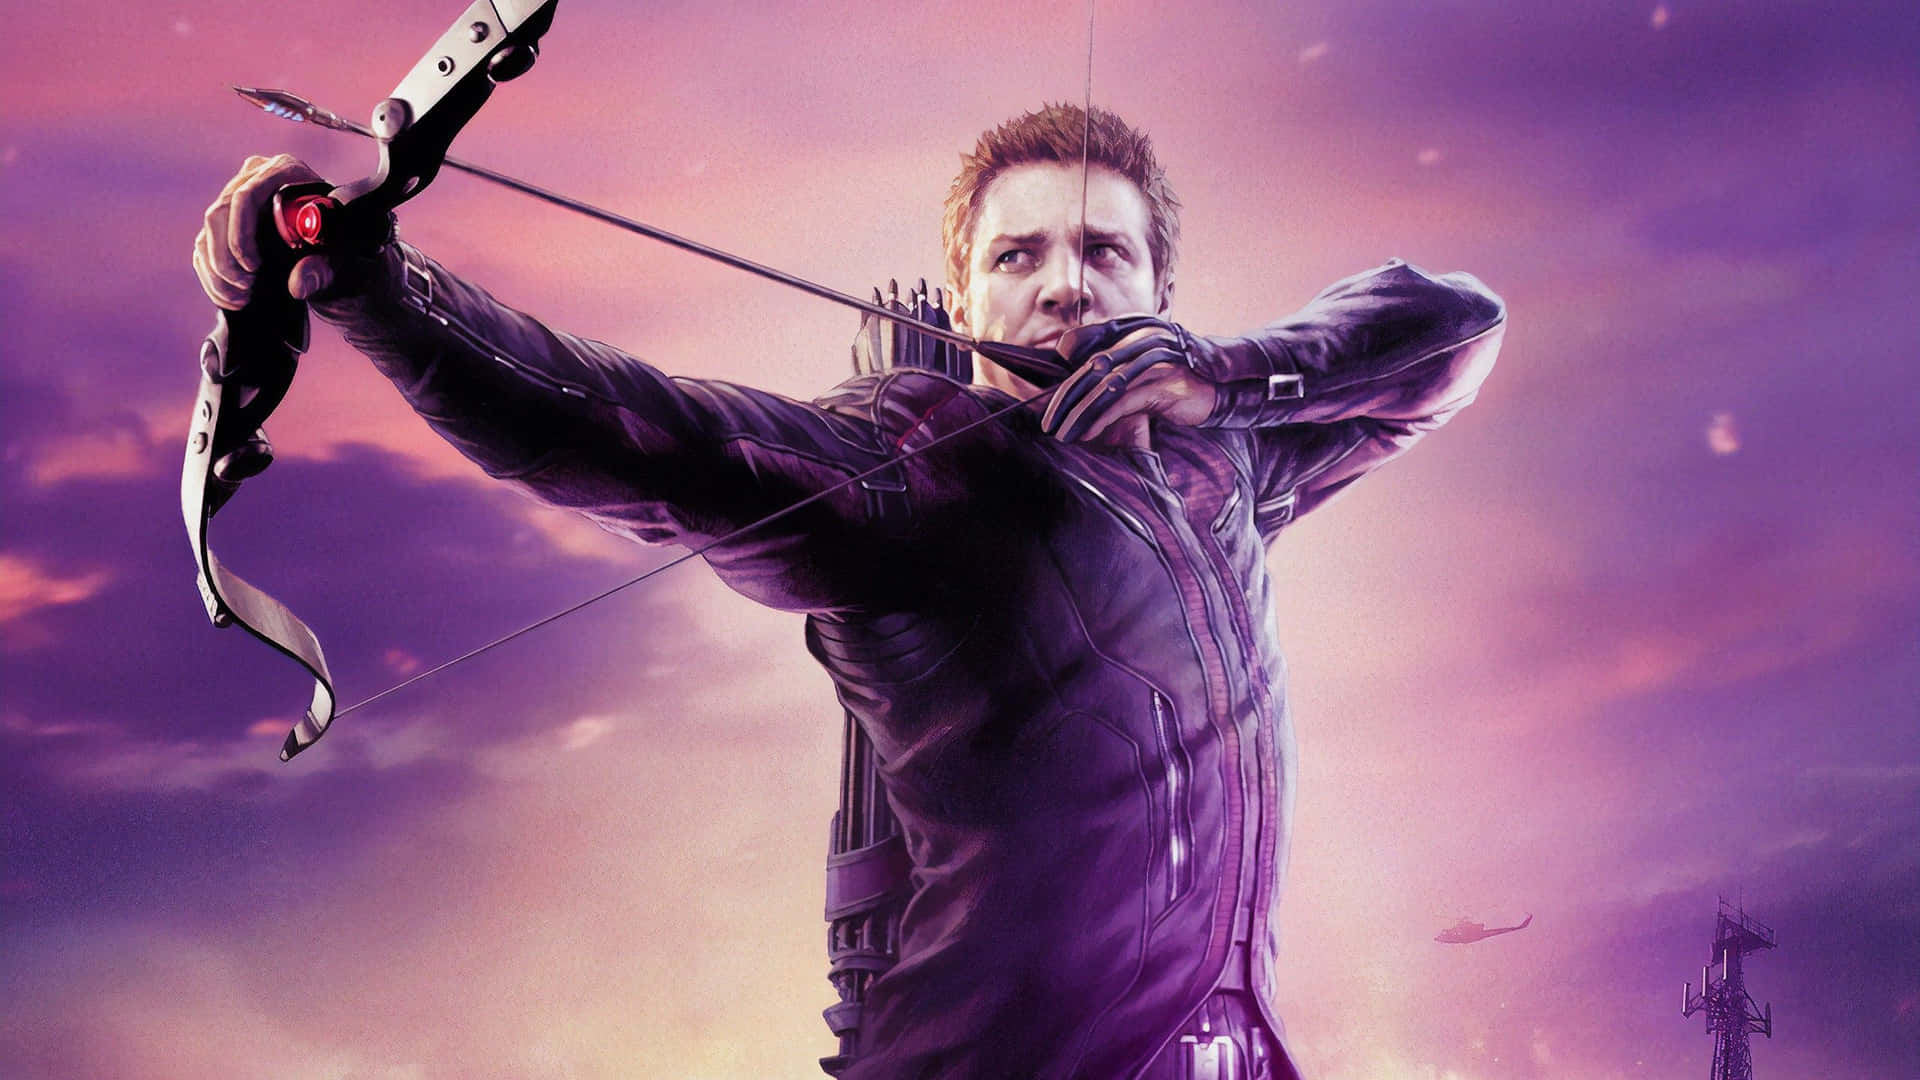 "Hawkeye wielding his iconic bow and arrow".